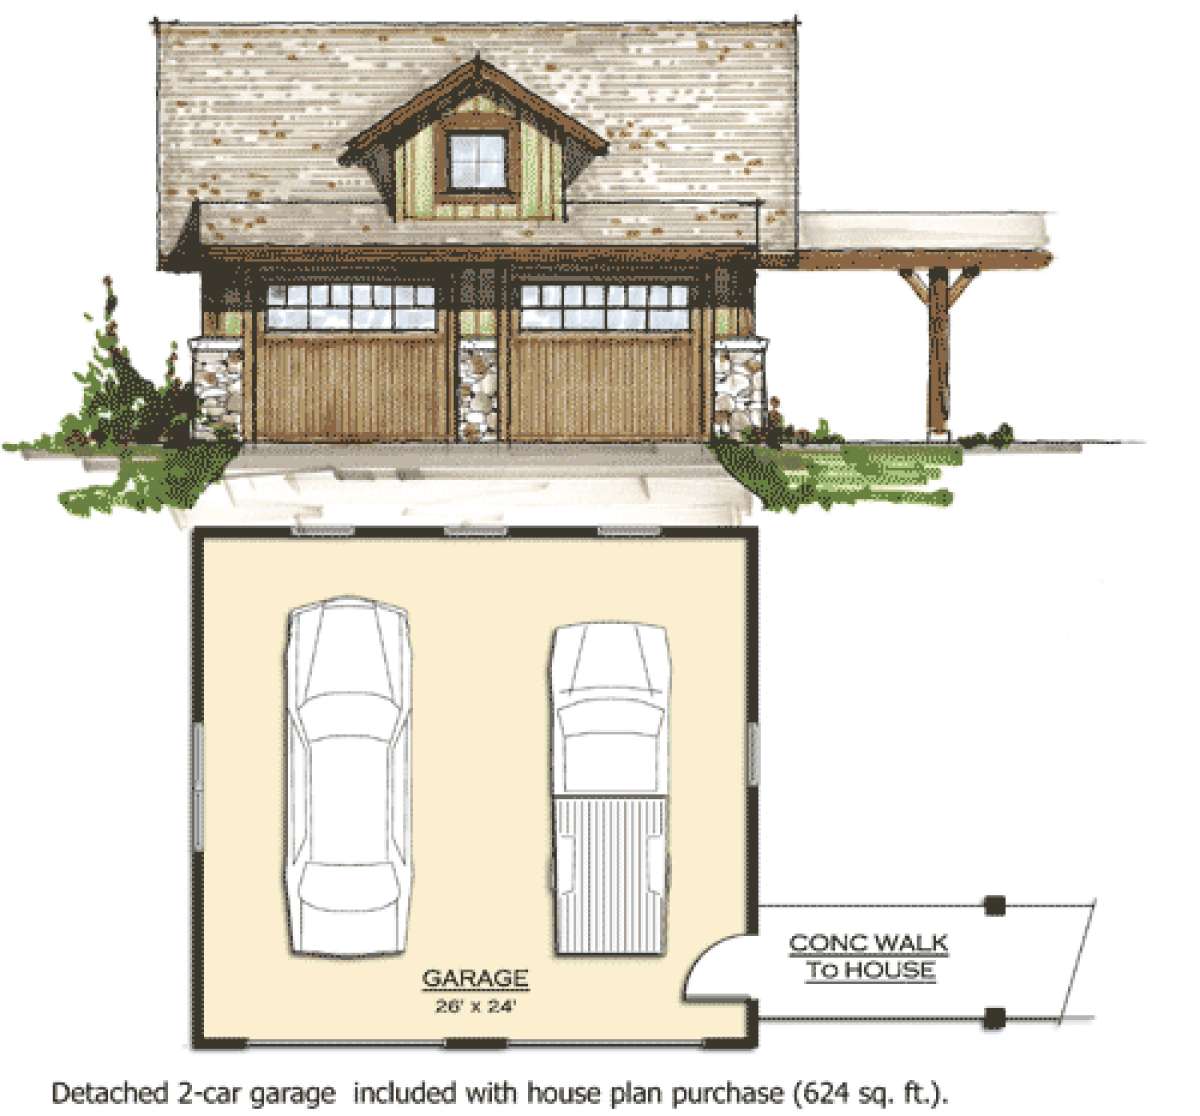 Garage for House Plan #8504-00031